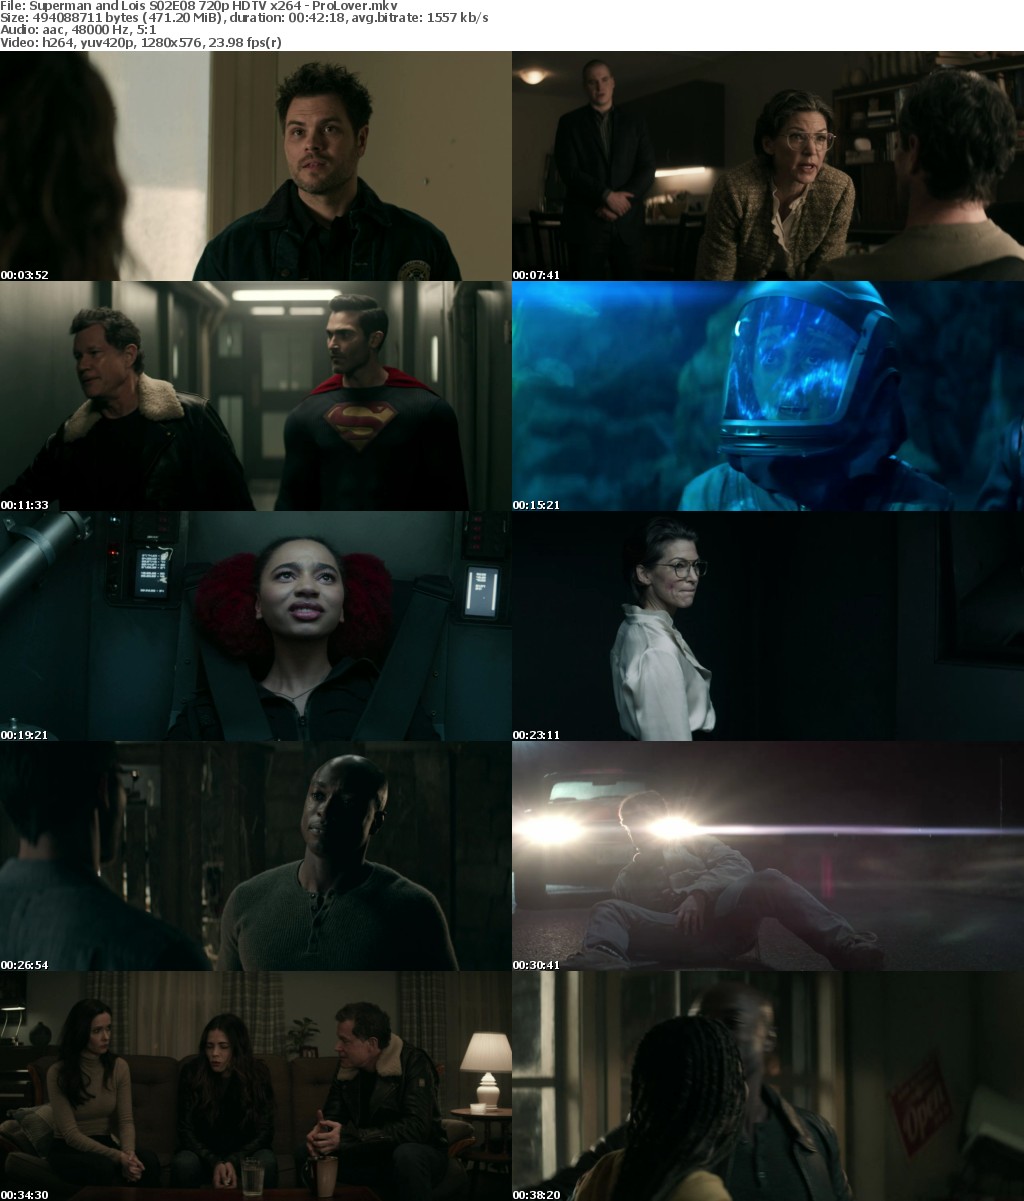 Superman and Lois S02 Season 2 COMPLETE 720p HDTV x264 - ProLover